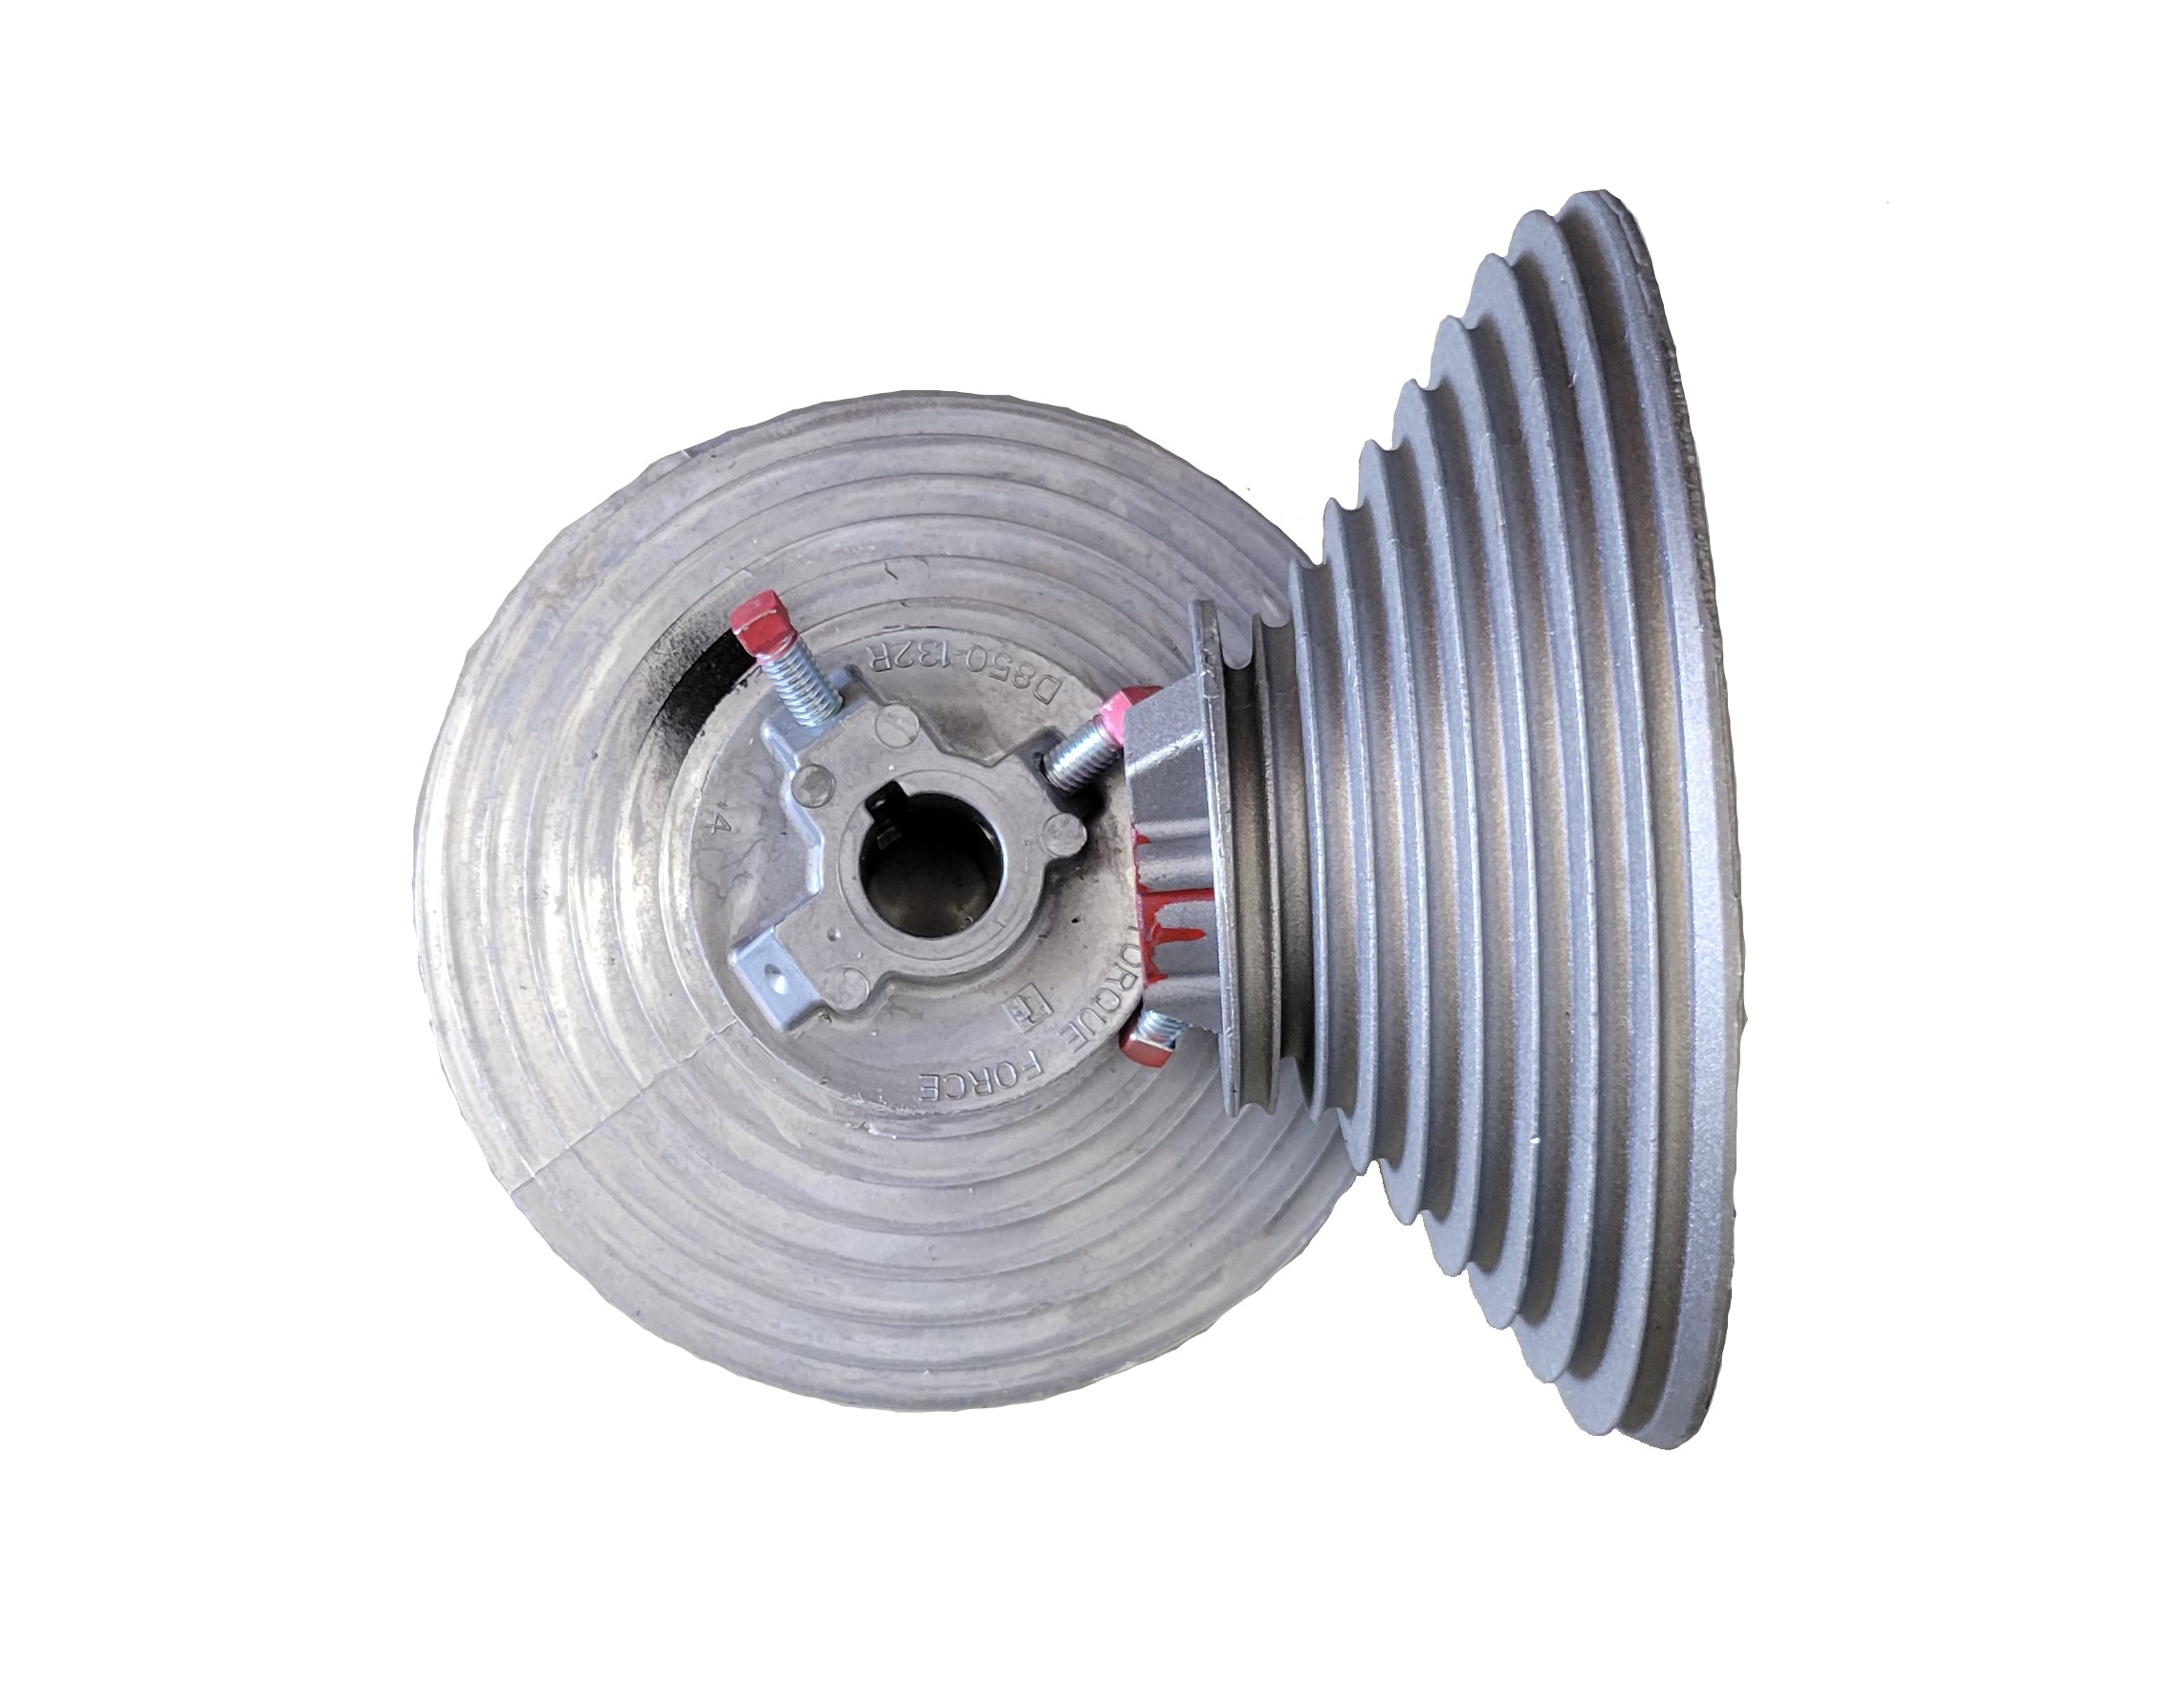 850-132 Cable Drum for Vertical Lift Doors Image